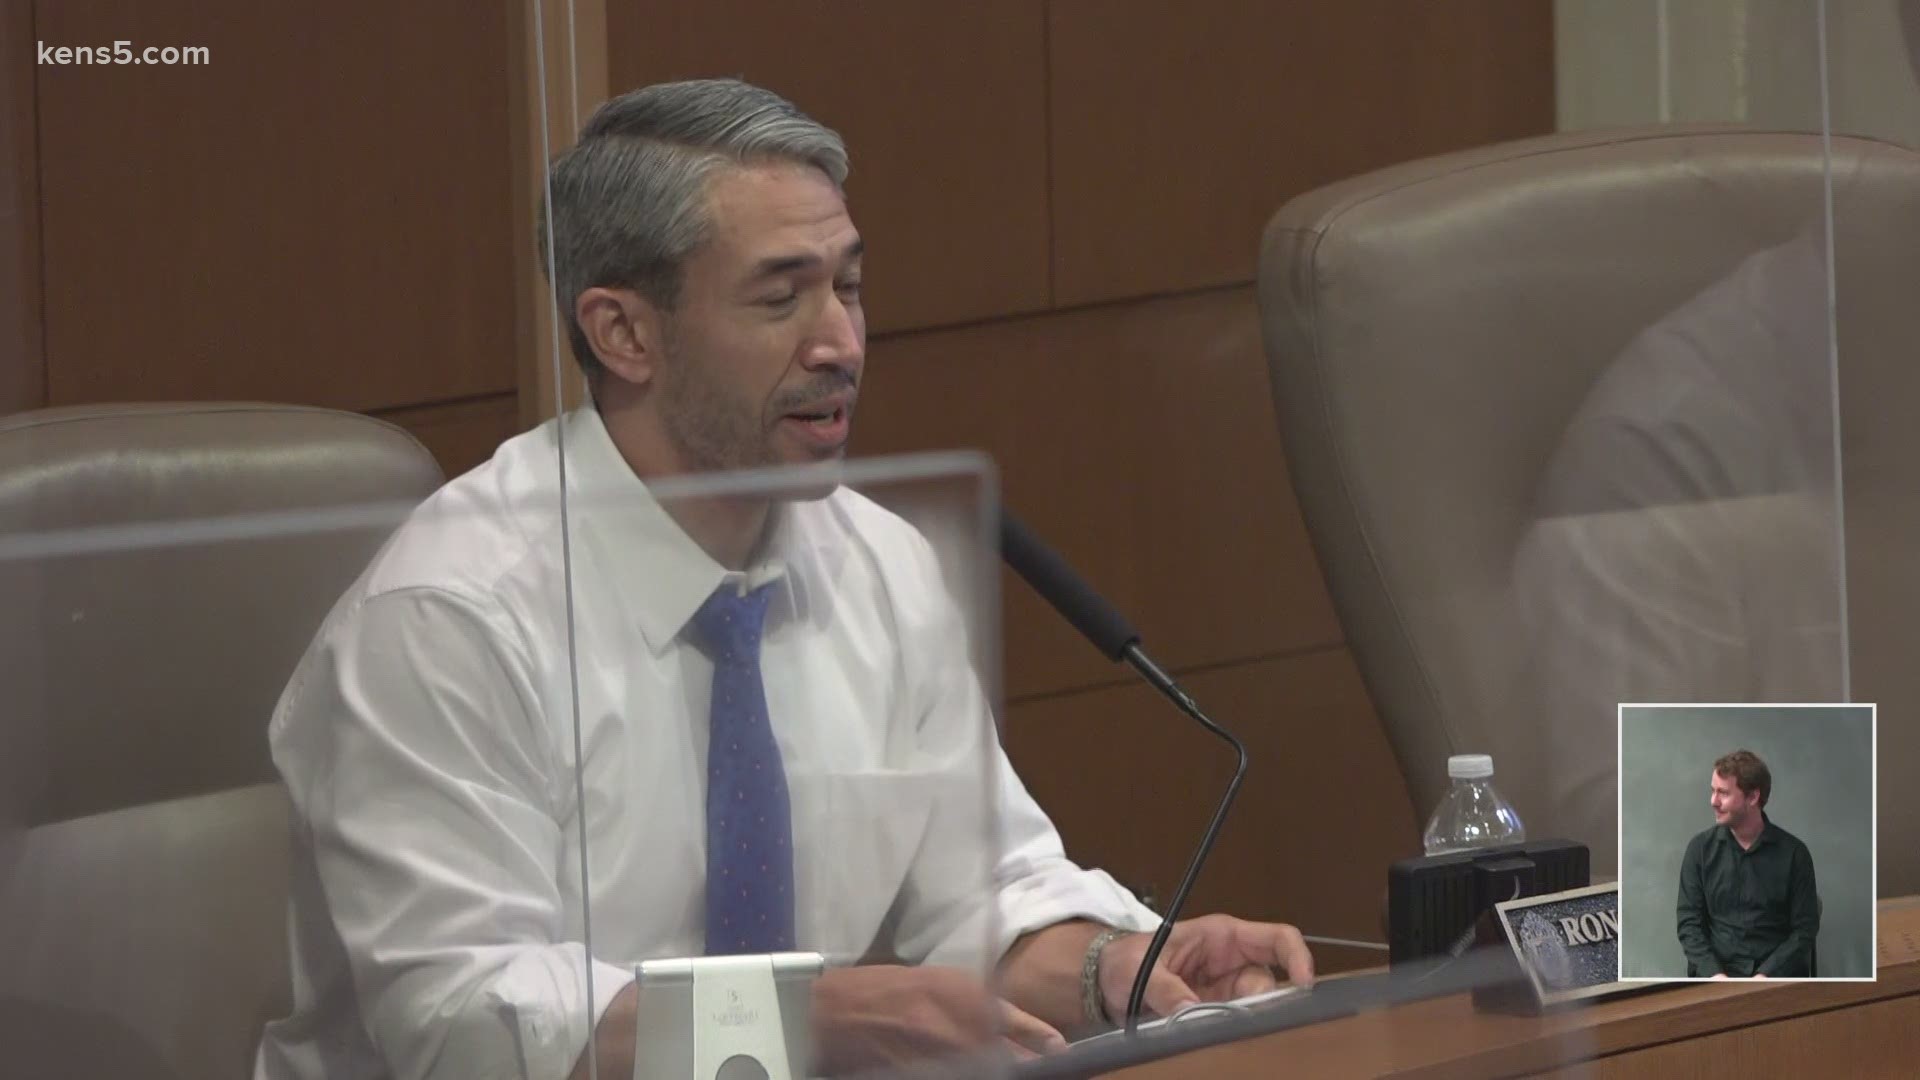 Mayor Ron Nirenberg reported 201 new cases Thursday, bringing the total to 65,423. He reported no new deaths, so the death toll remains at 1,250.